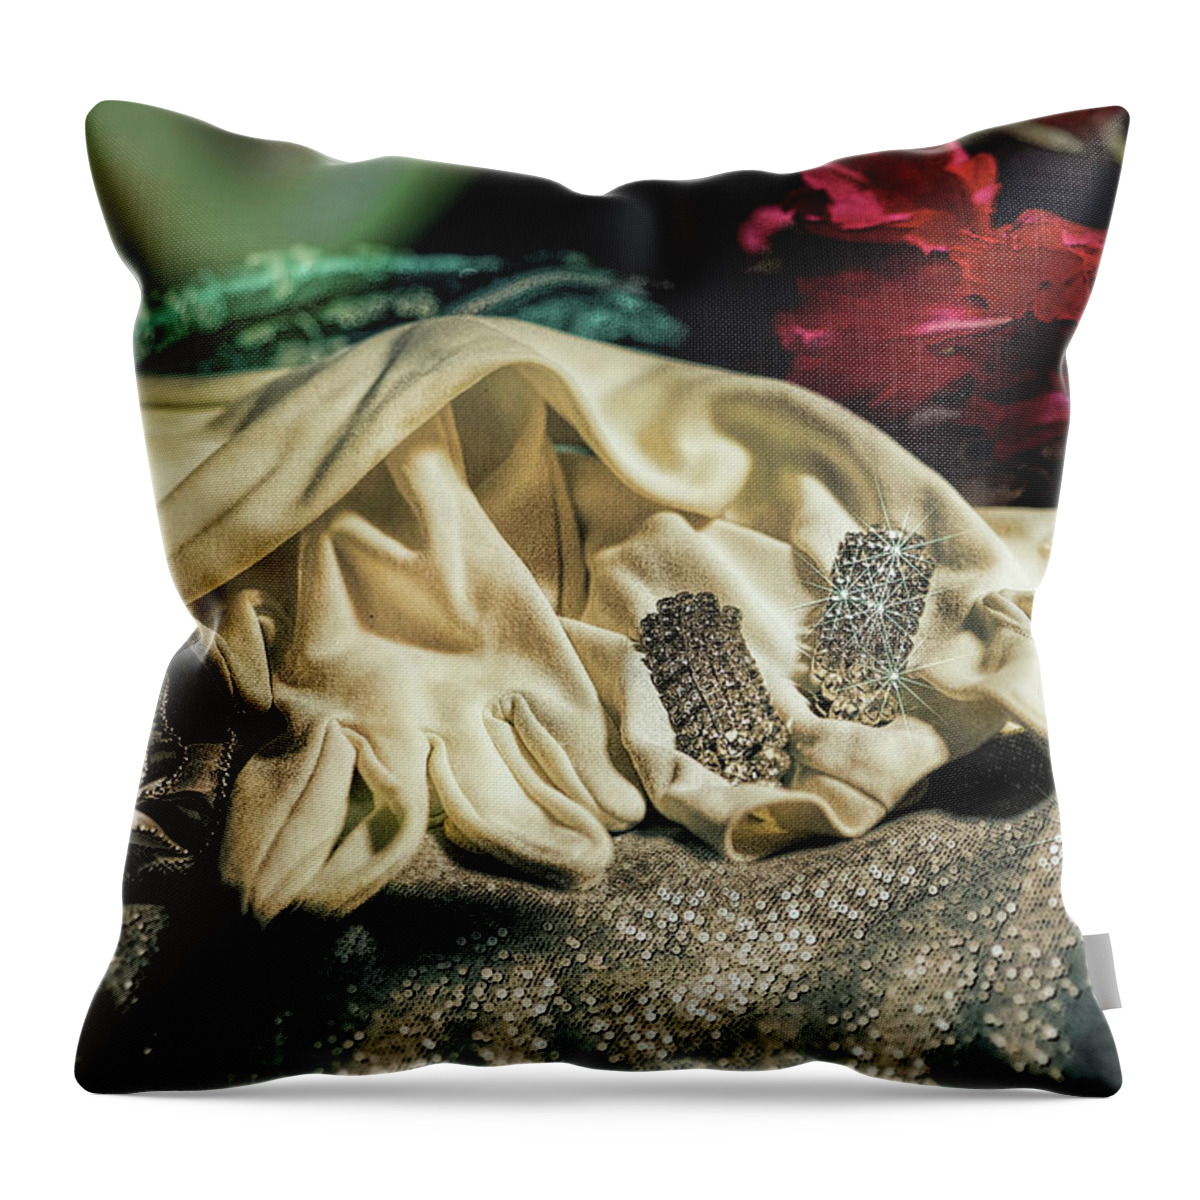 Gloves Throw Pillow featuring the photograph Lady's Long White Gloves by Cordia Murphy